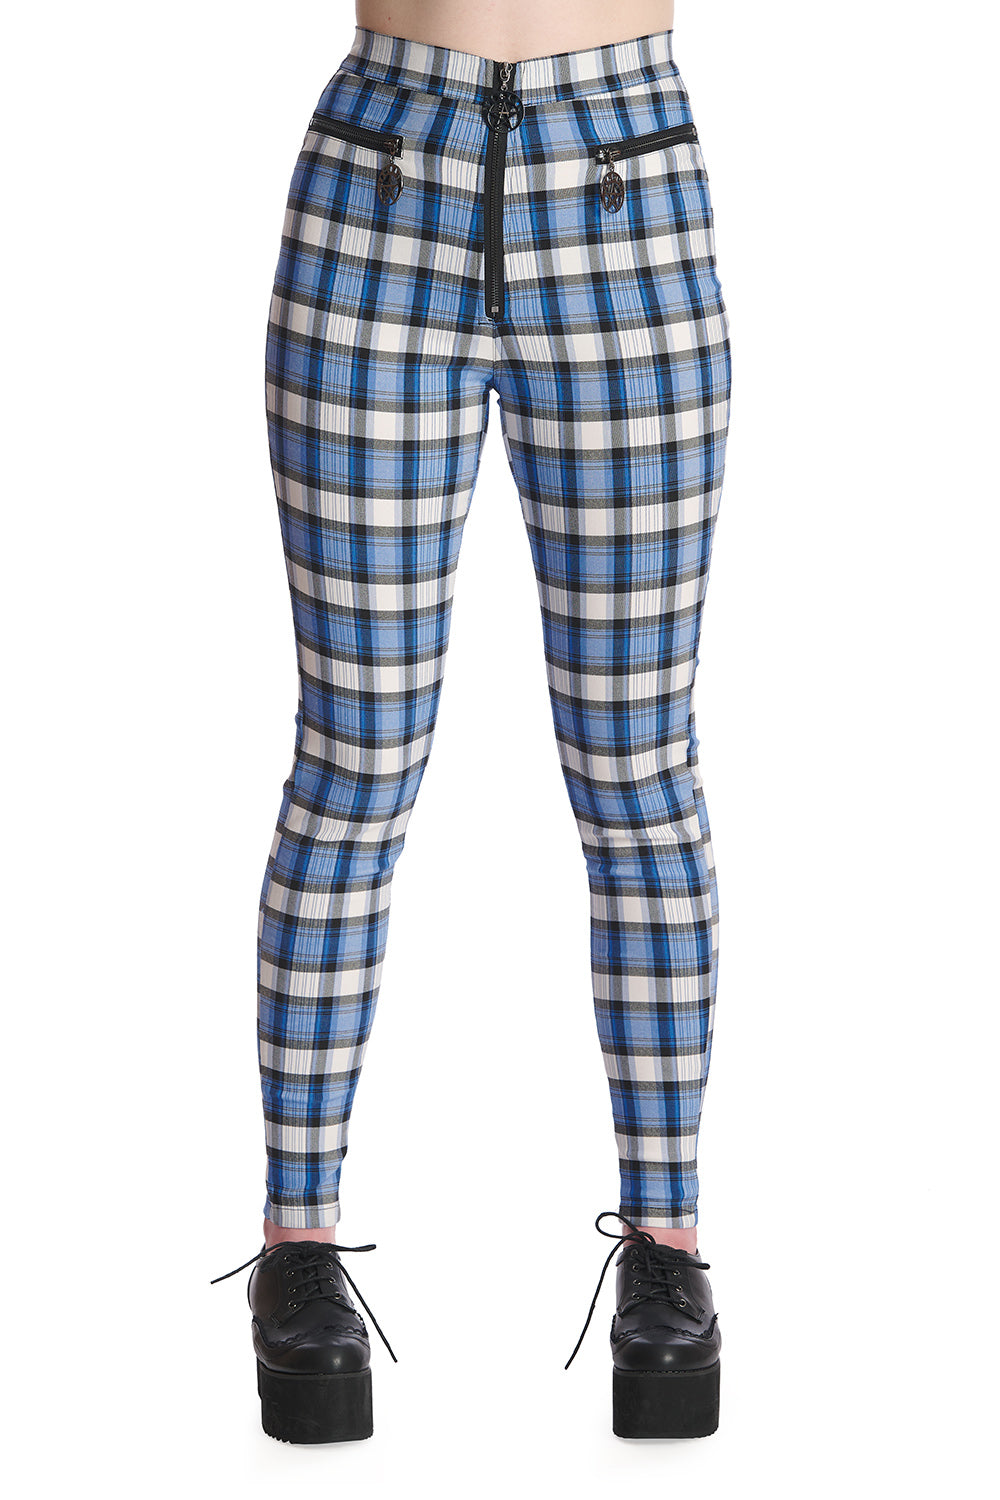  Banned Tartan Skinny Trousers Enchanted Check Bright Red Punk  Gothic Pants - Red (S) : Clothing, Shoes & Jewelry